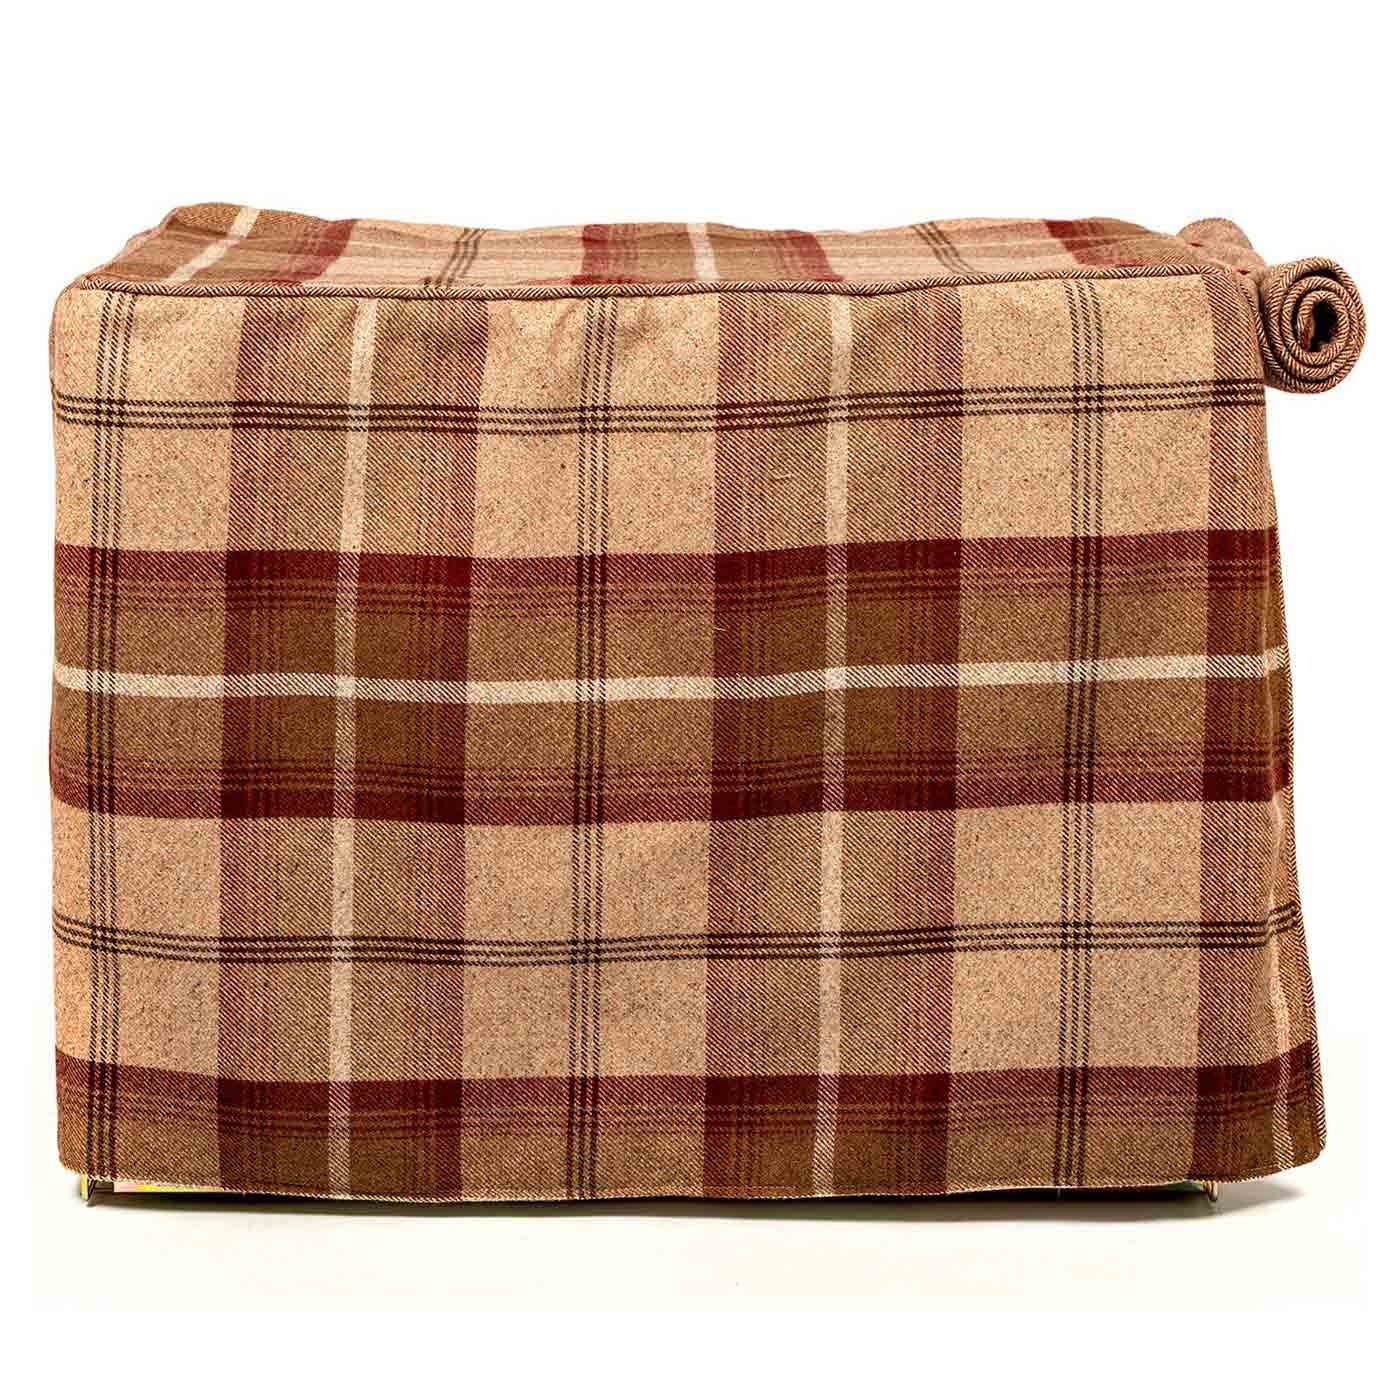 Dog Crate Cover in Balmoral Mulberry Tweed by Lords & Labradors